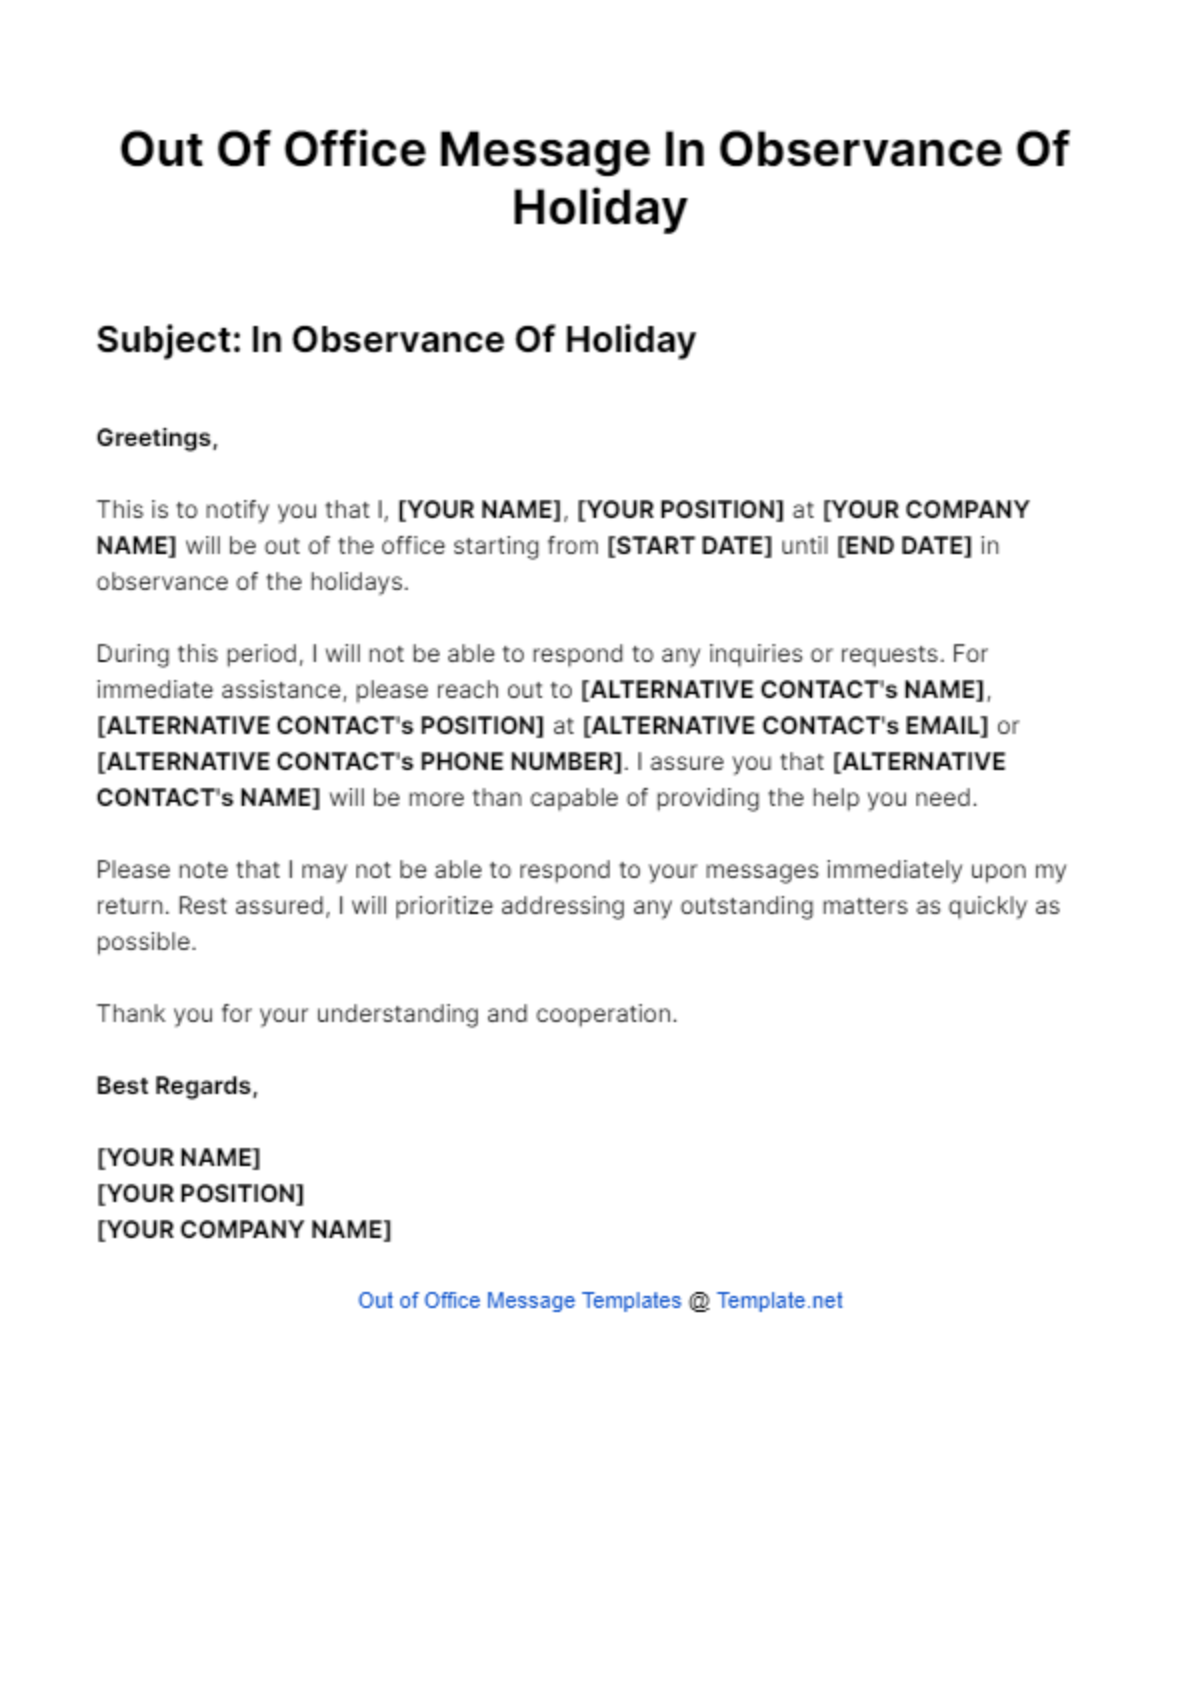 Out Of Office Message In Observance Of Holiday Template